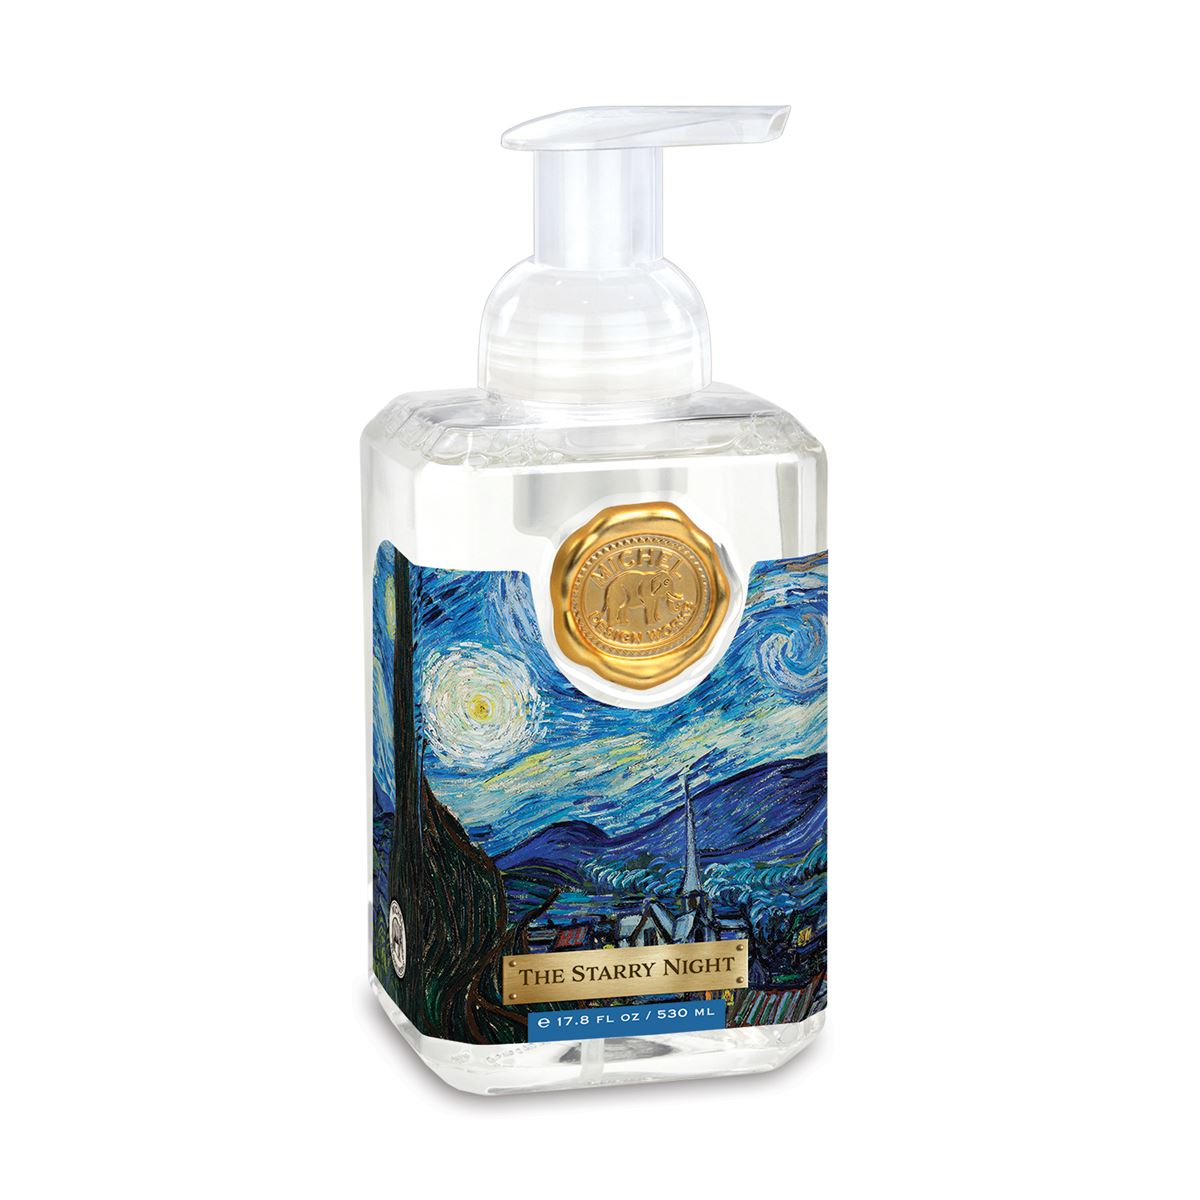 The Starry Night Foaming Hand Soap by Michel Design Works